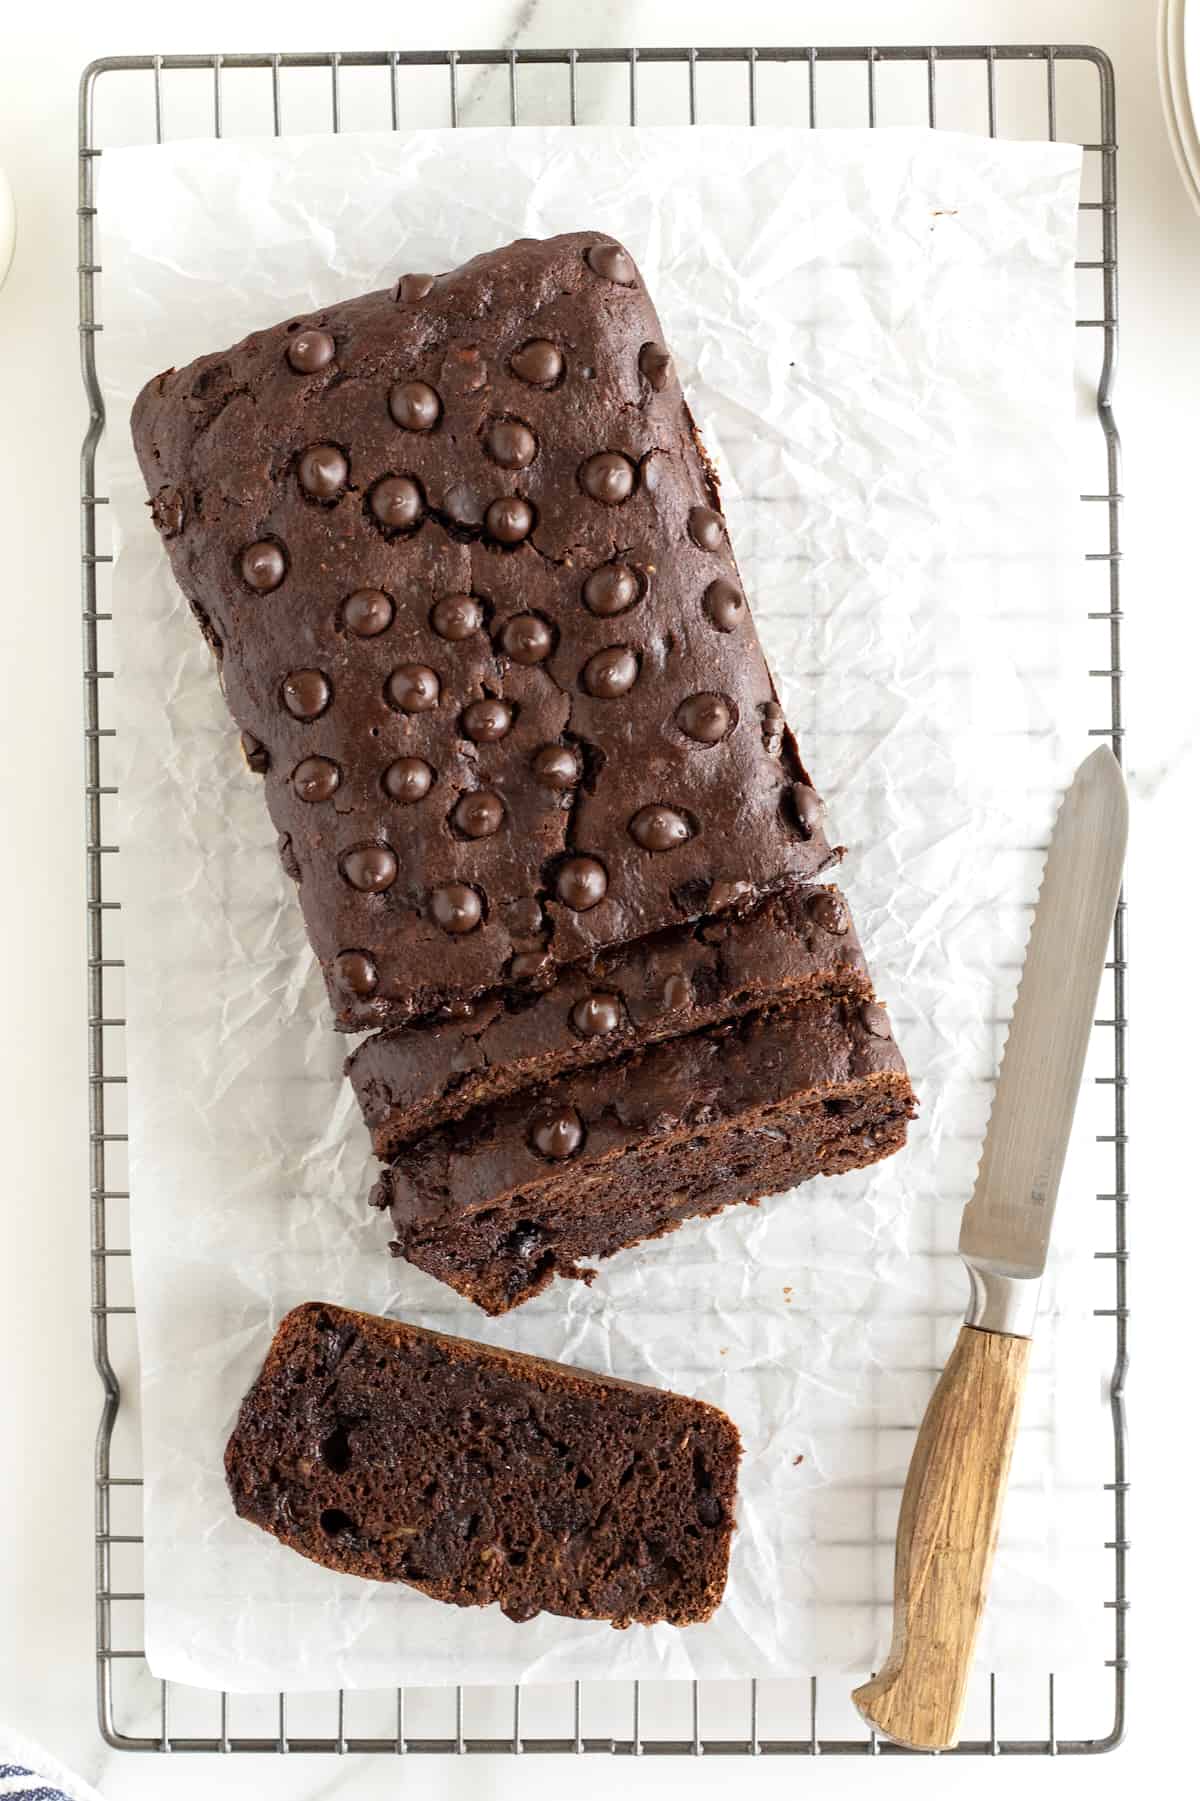 A loaf of chocolate banana bread on a parchment lined cooling rack with a bread knife.